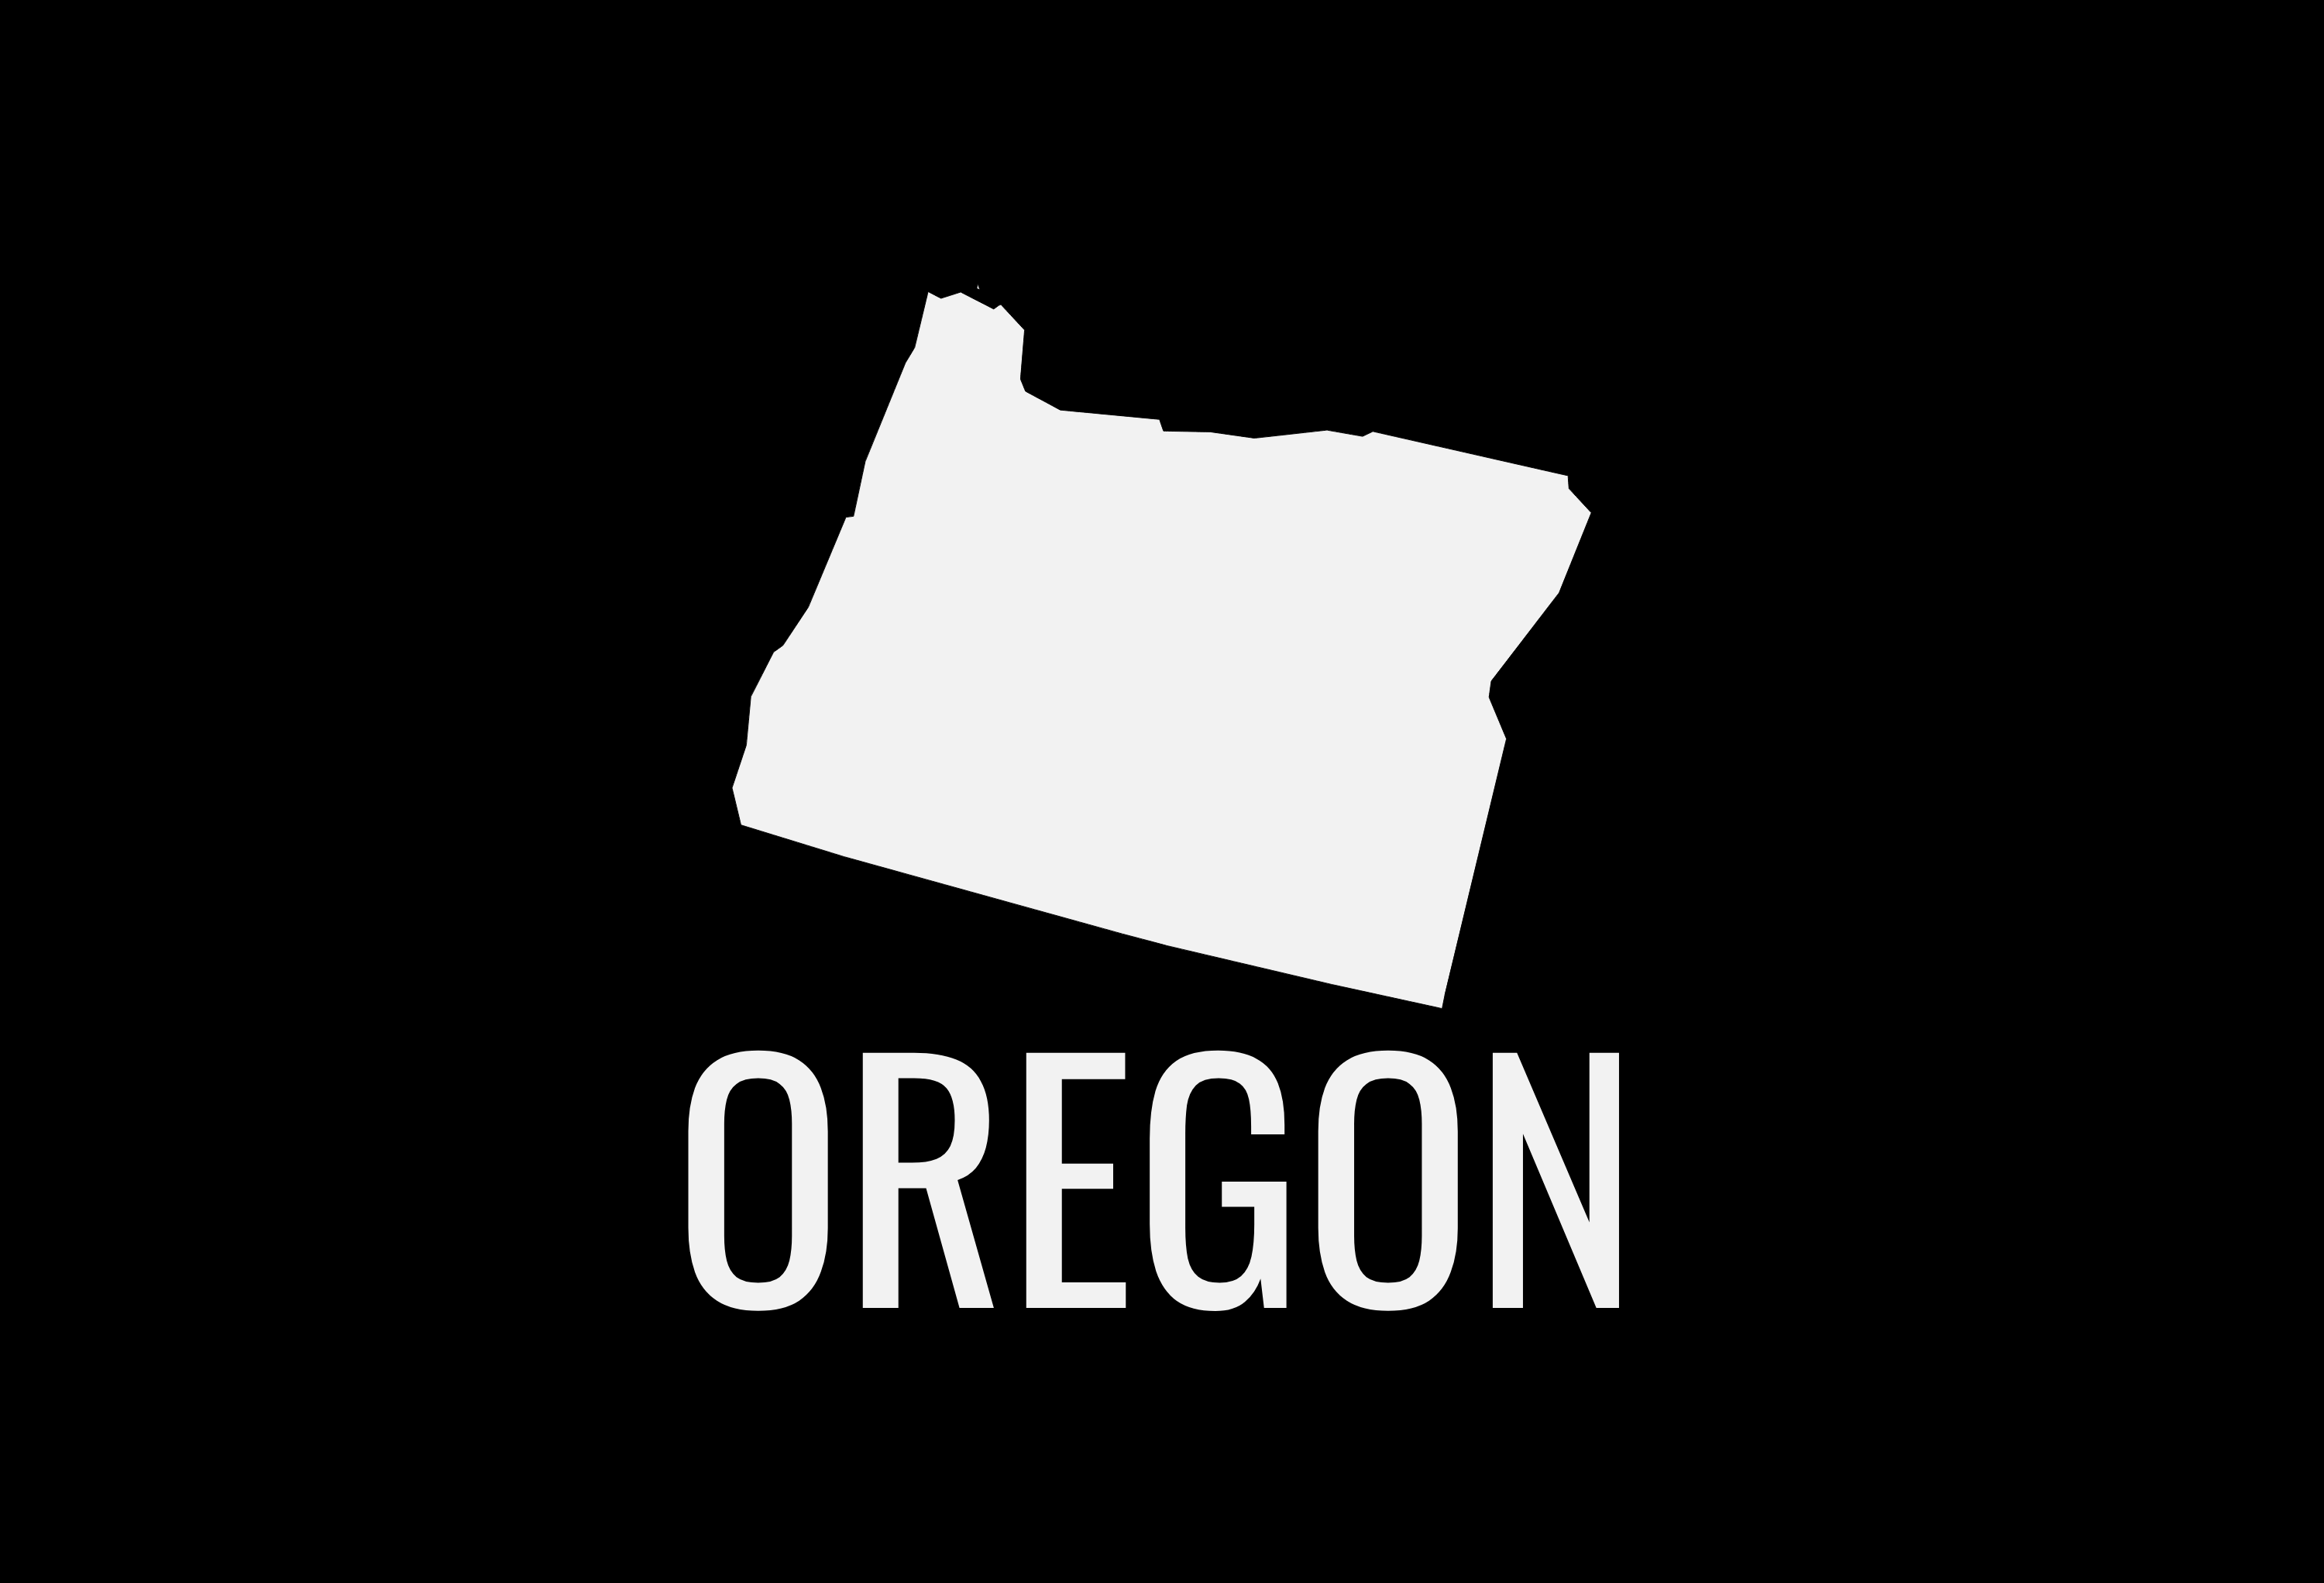 Oregon State Map Car Decal - Permanent Vinyl Sticker for Cars, Vehicle, Doors, Windows, Laptop, and more!